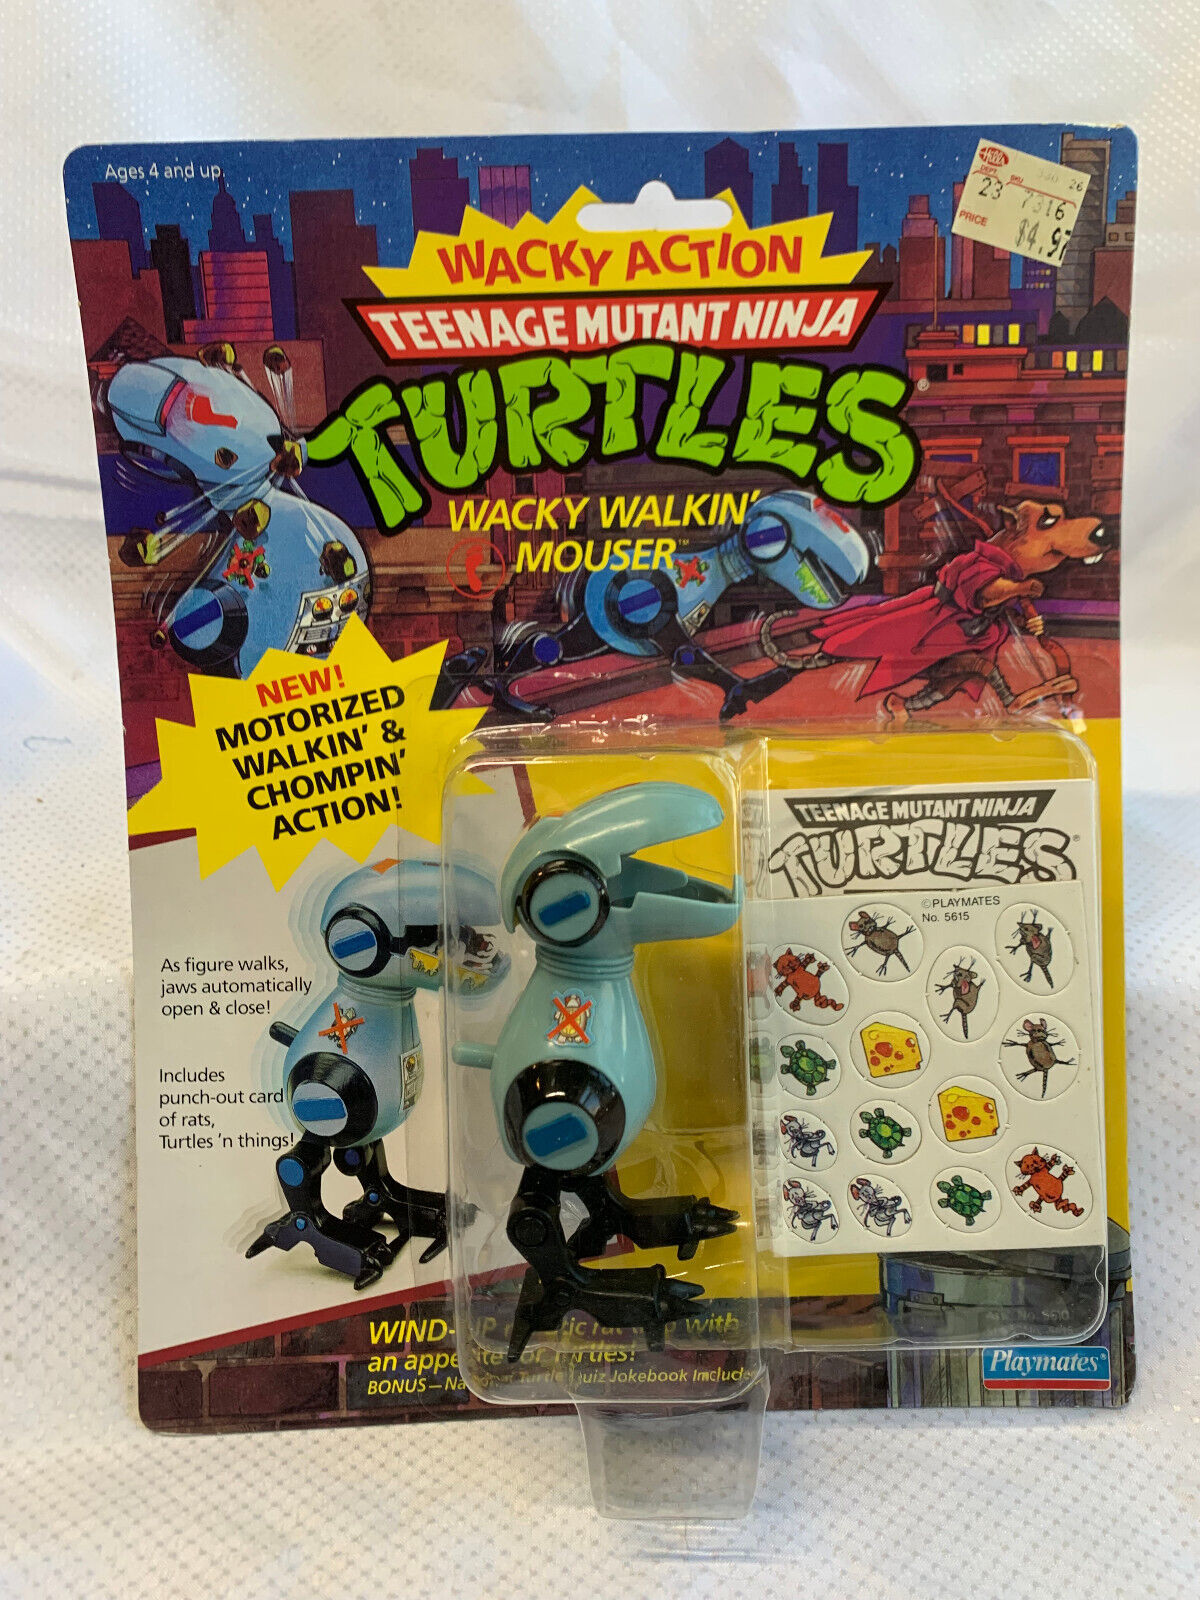 1989 Playmates Toys "WACKY WALKIN MOUSER" TMNT Action Figure in Blister Pack - $128.65